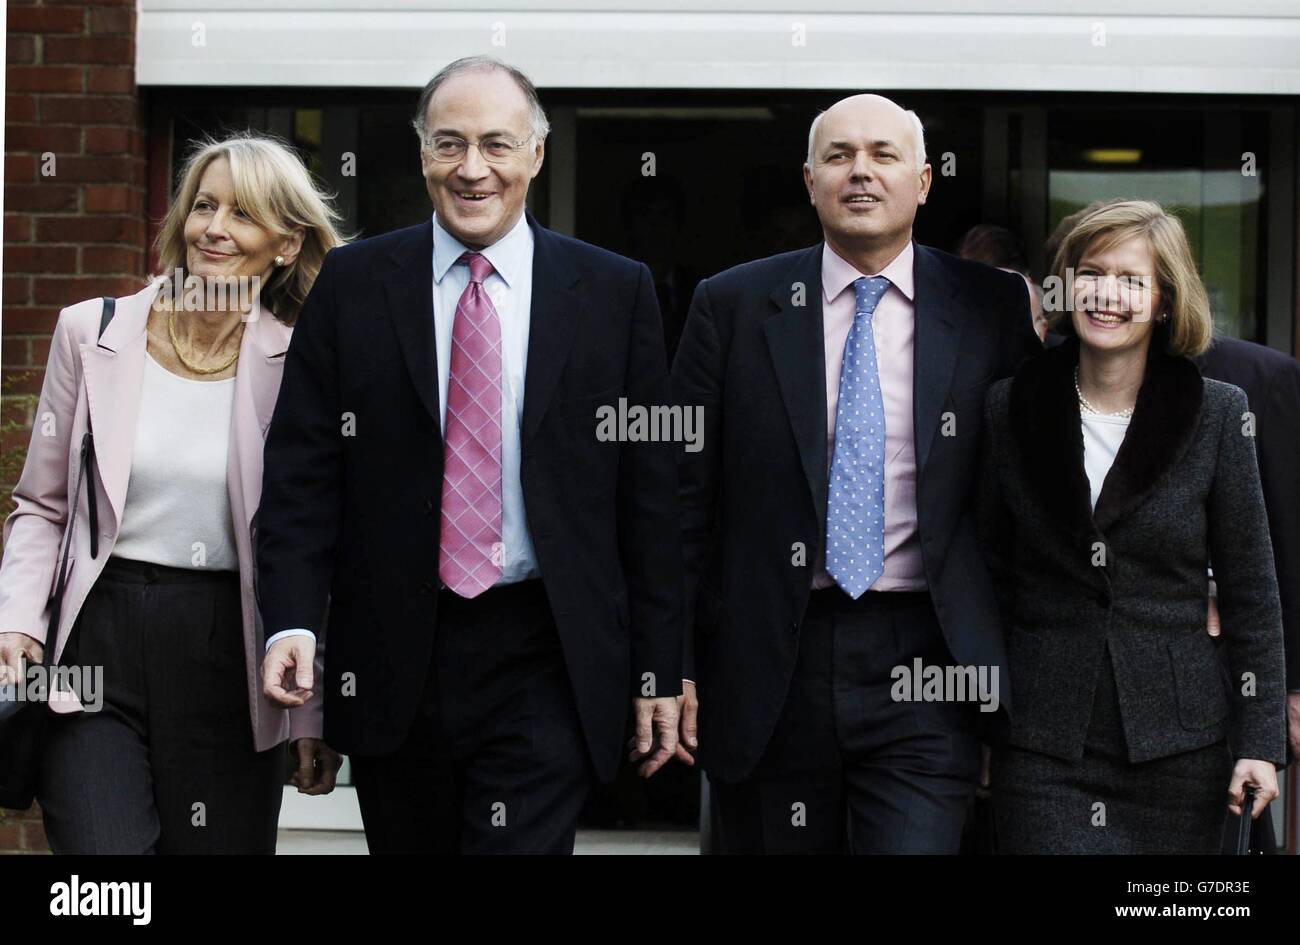 Leader of the Conservative party Michael Howard (left) and his wife Sandra depart with former leader Iain Duncan Smith and his wife Betsy after a tour of the Pollock Community centre in Glasgow. Stock Photo